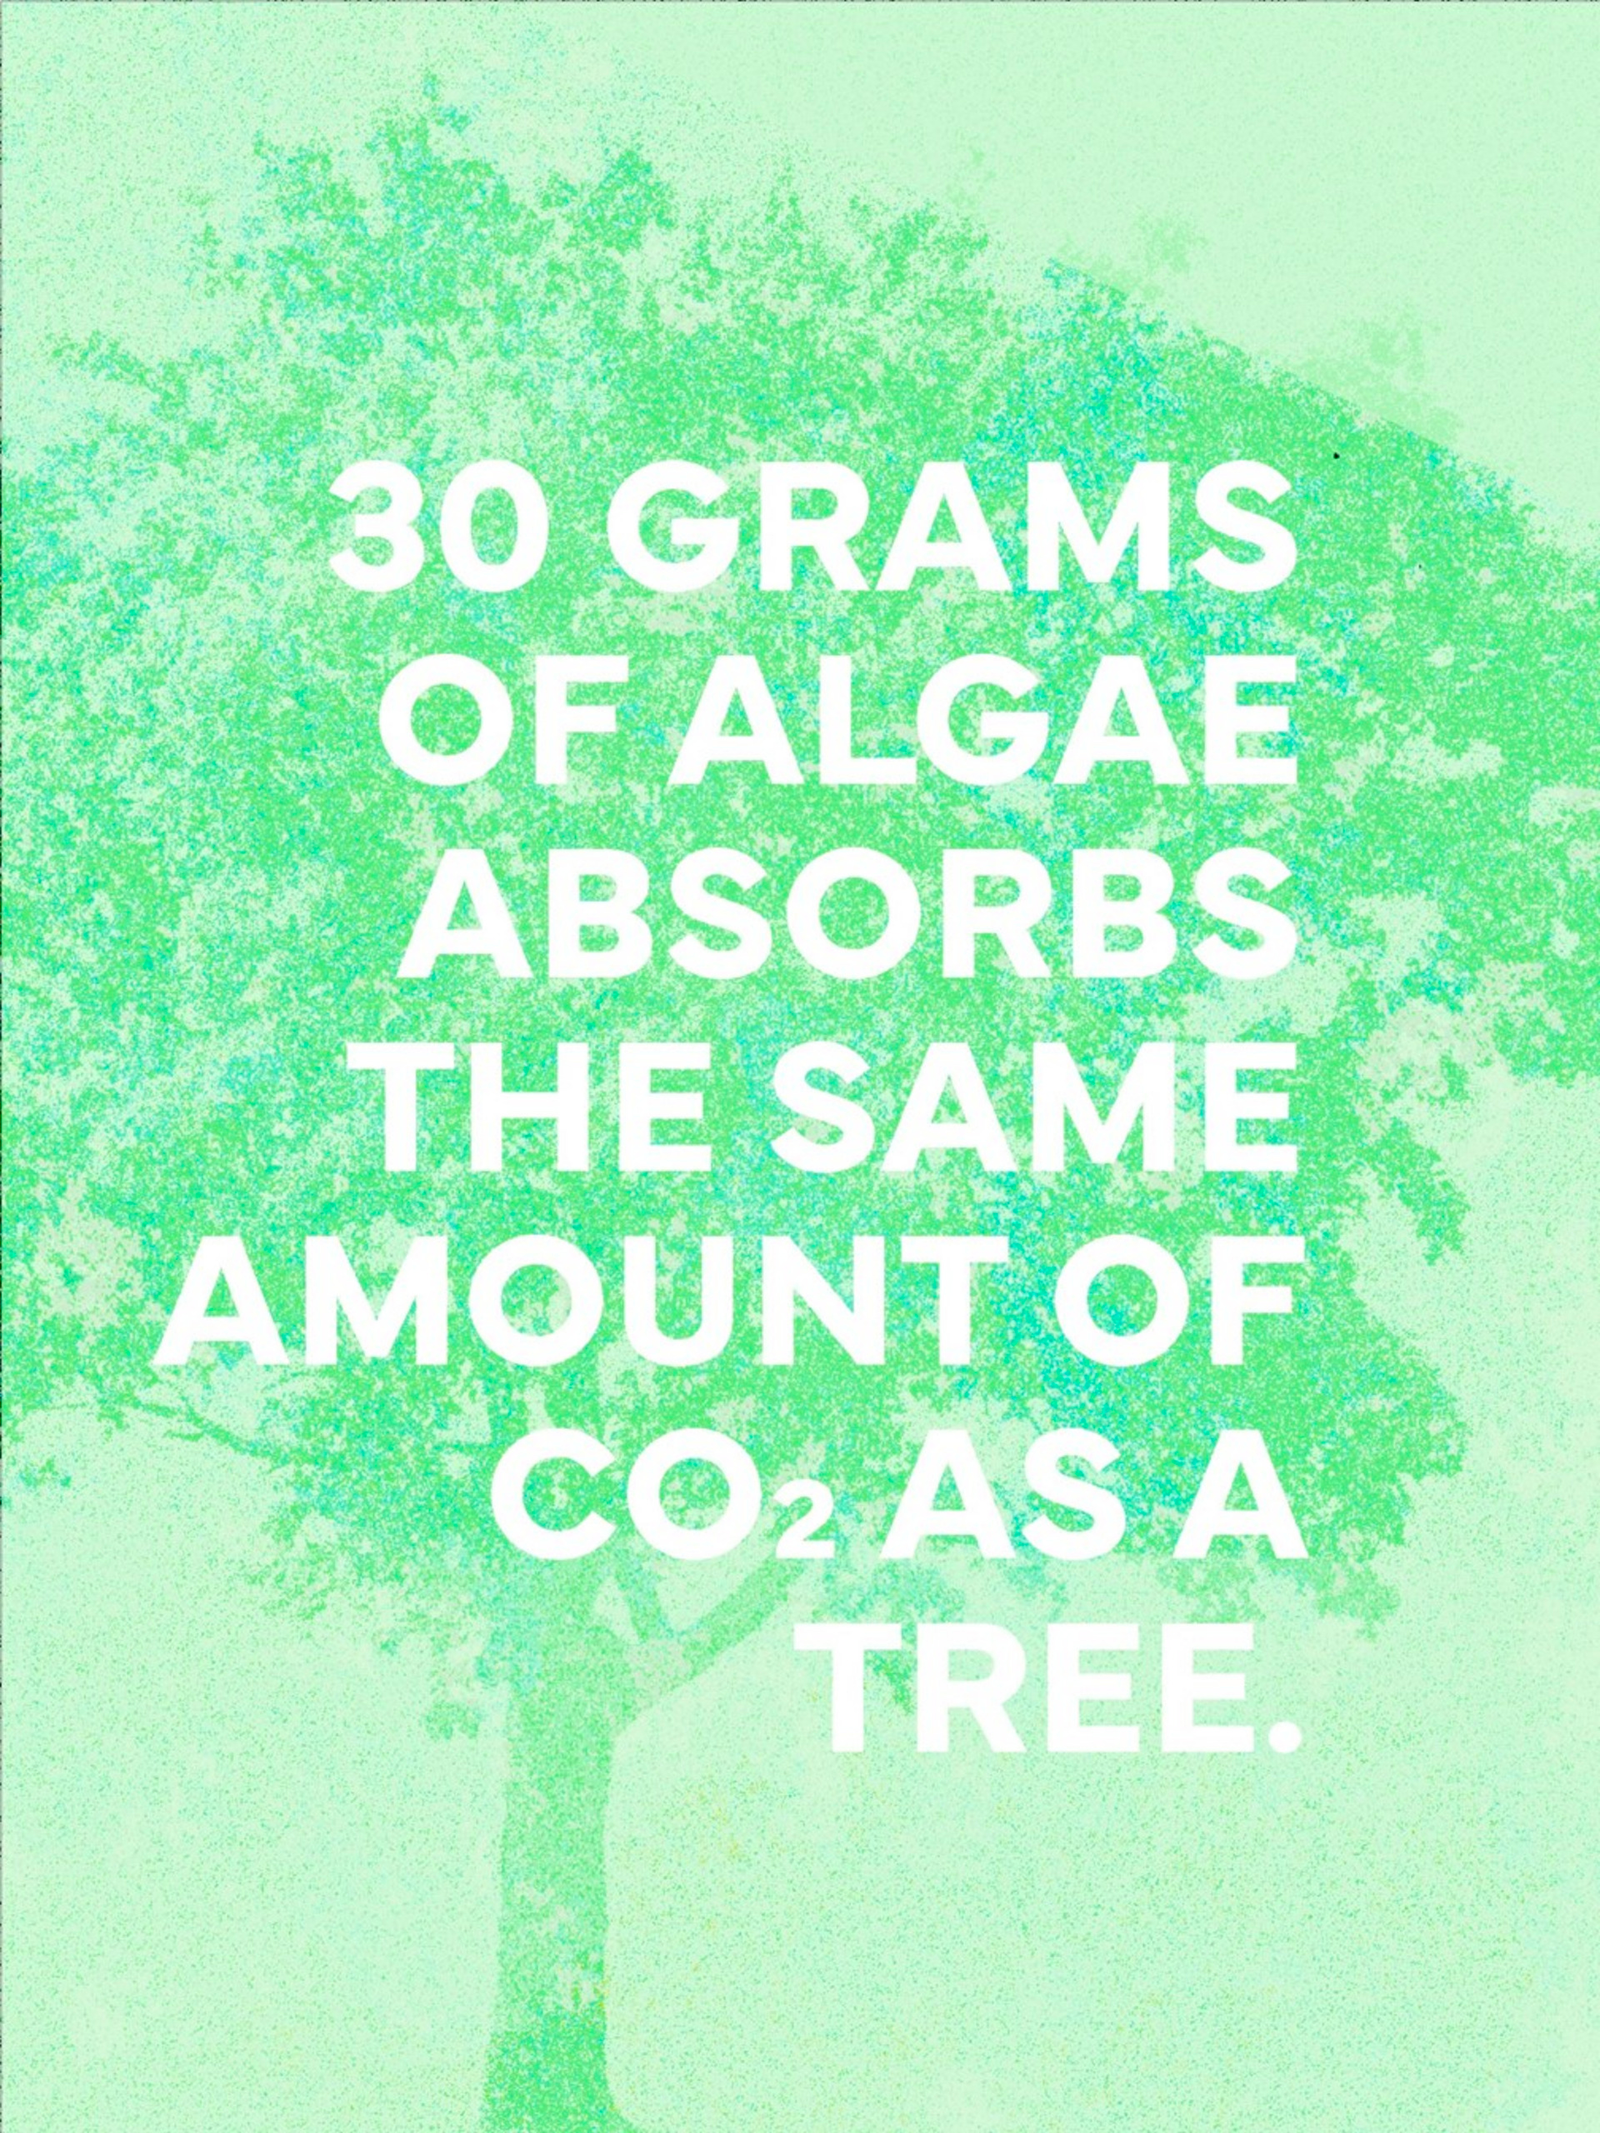 "30 grams of algae absorbs the same amount of CO2 as a tree" with a tree graphic layered behind